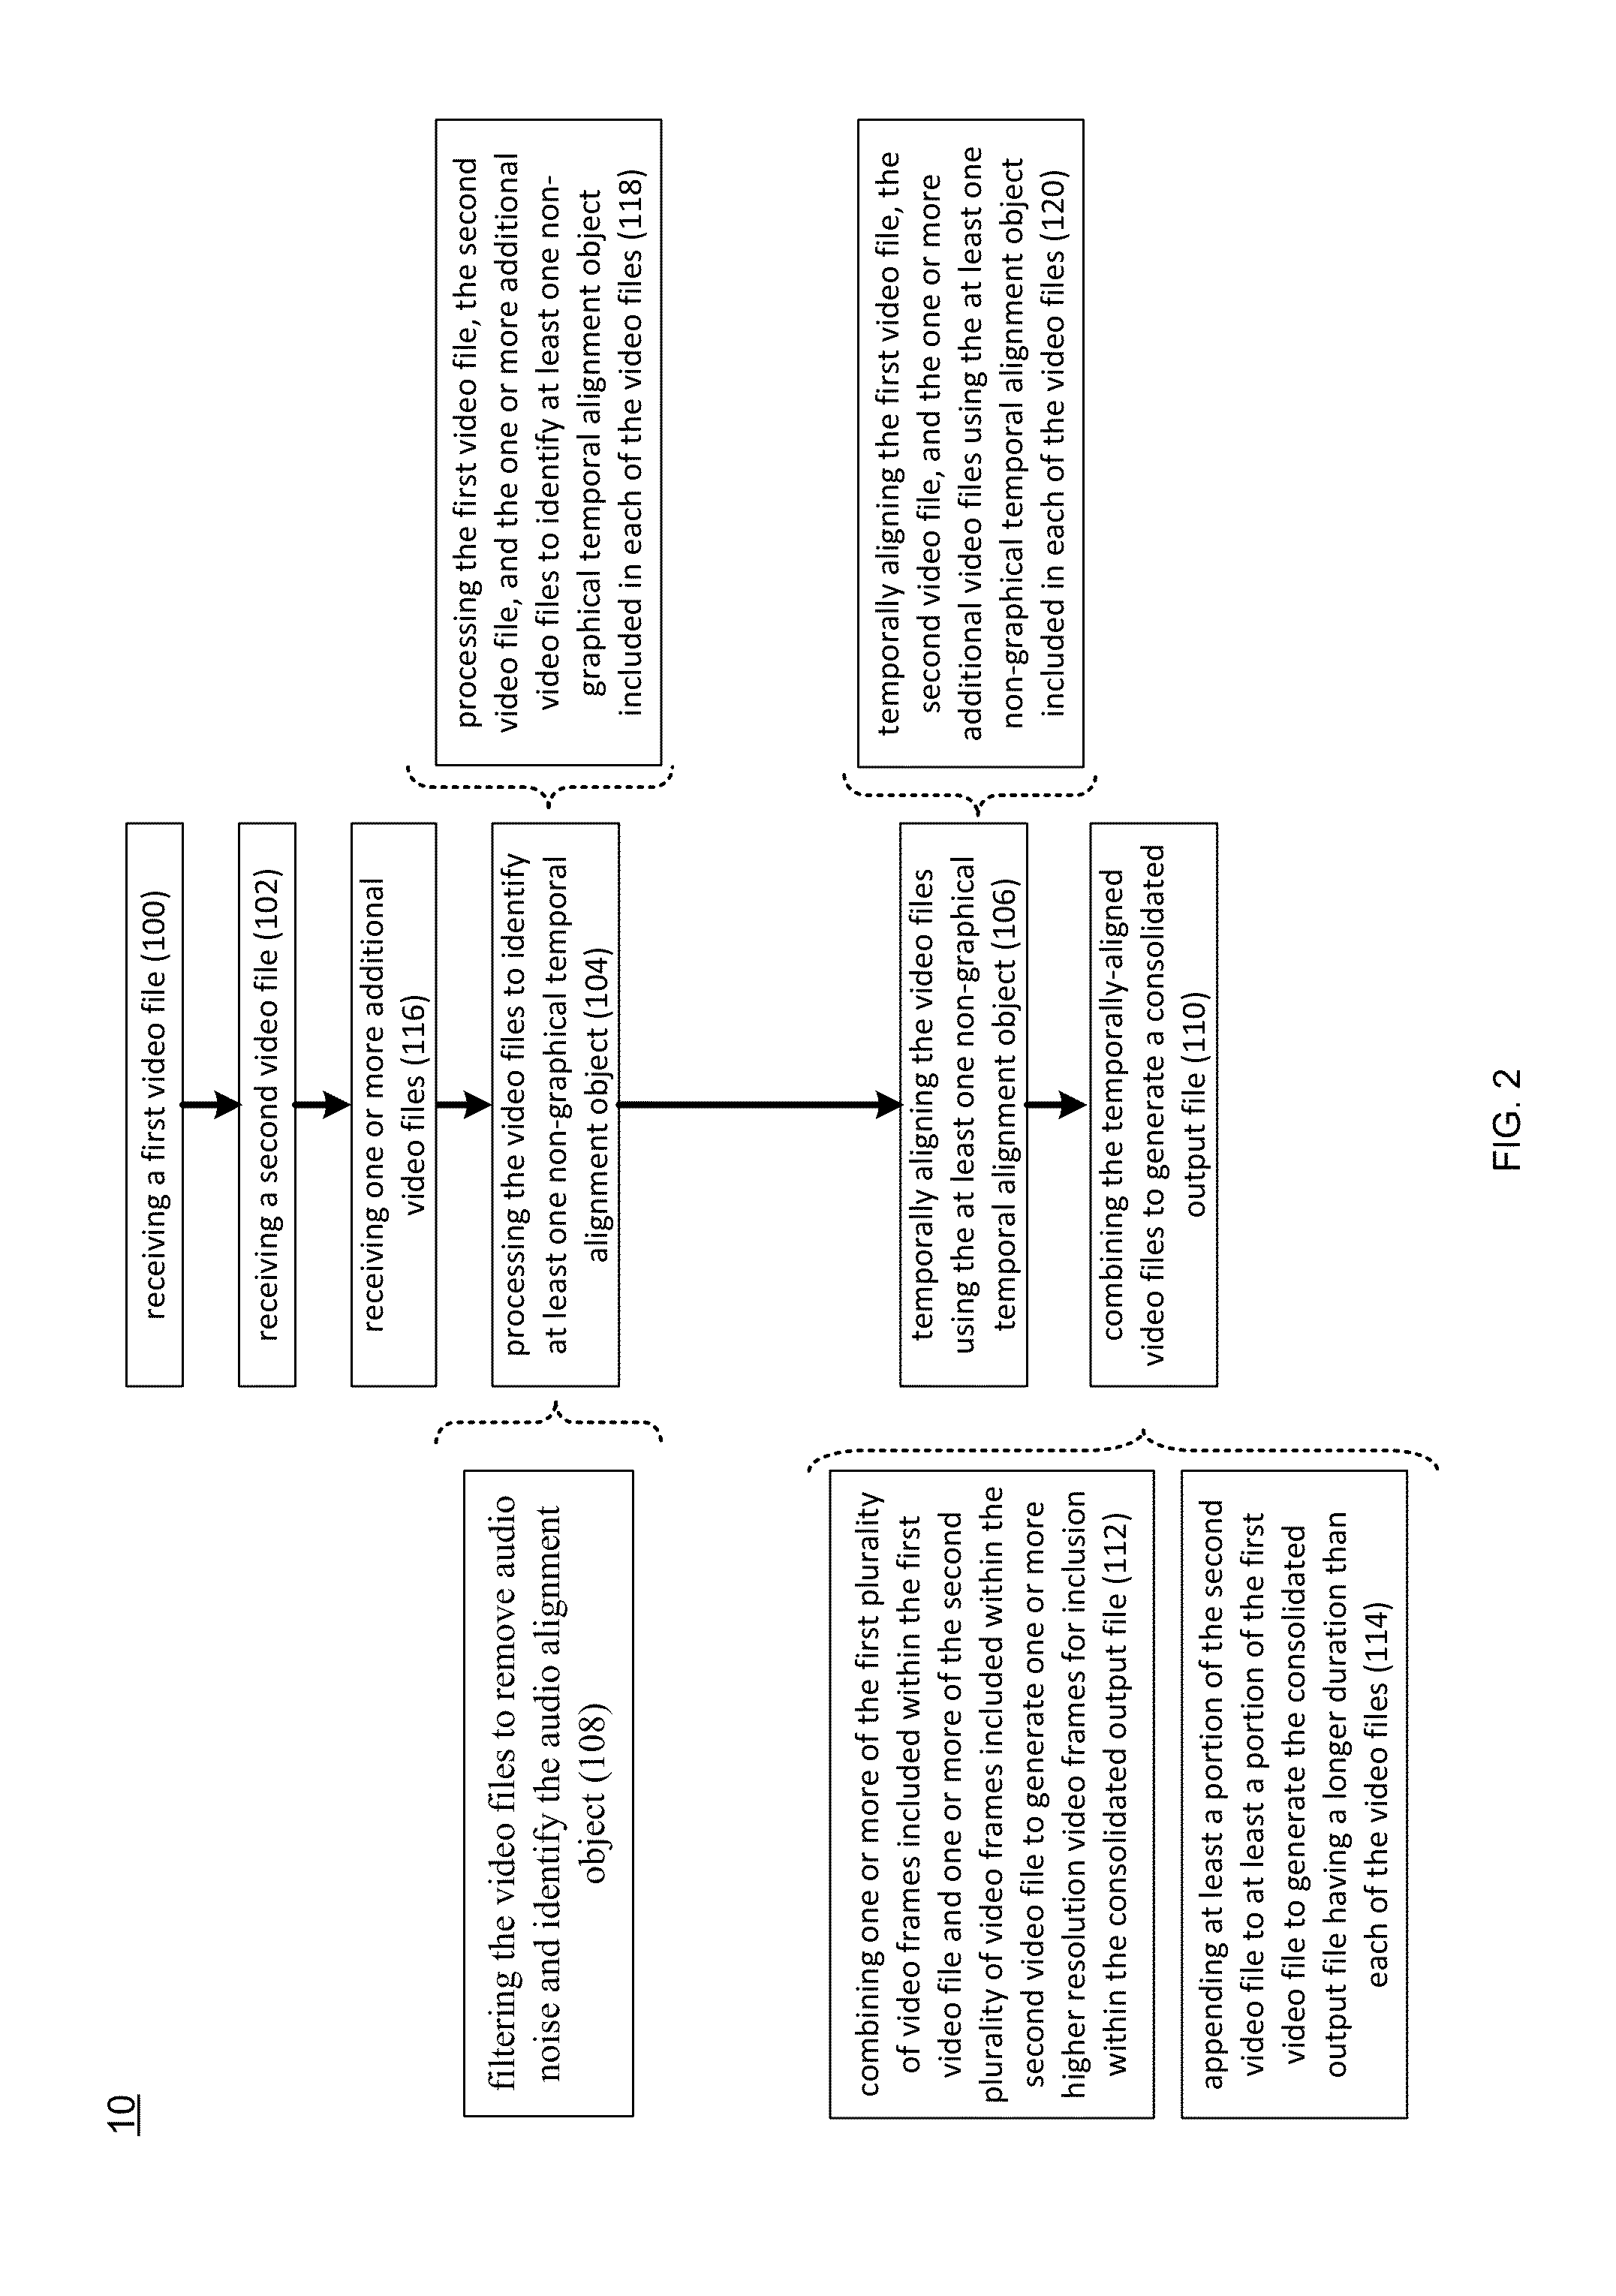 Video stitching system and method